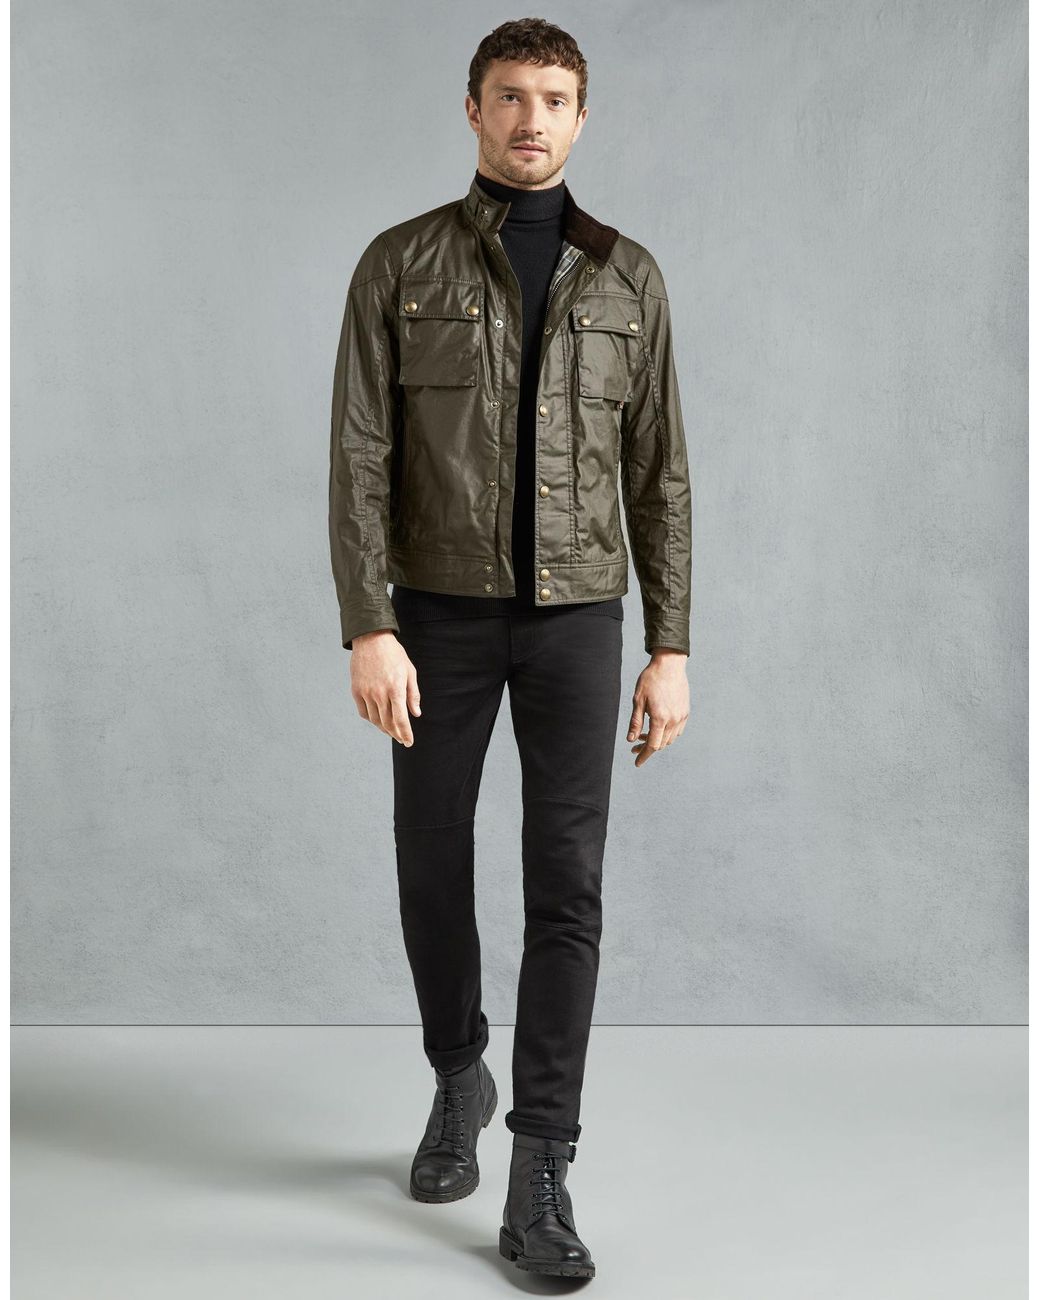 DIARY OF A CLOTHESHORSE: MUST SEE - BELSTAFF SPOTTED IN THE LYST.COM SALE